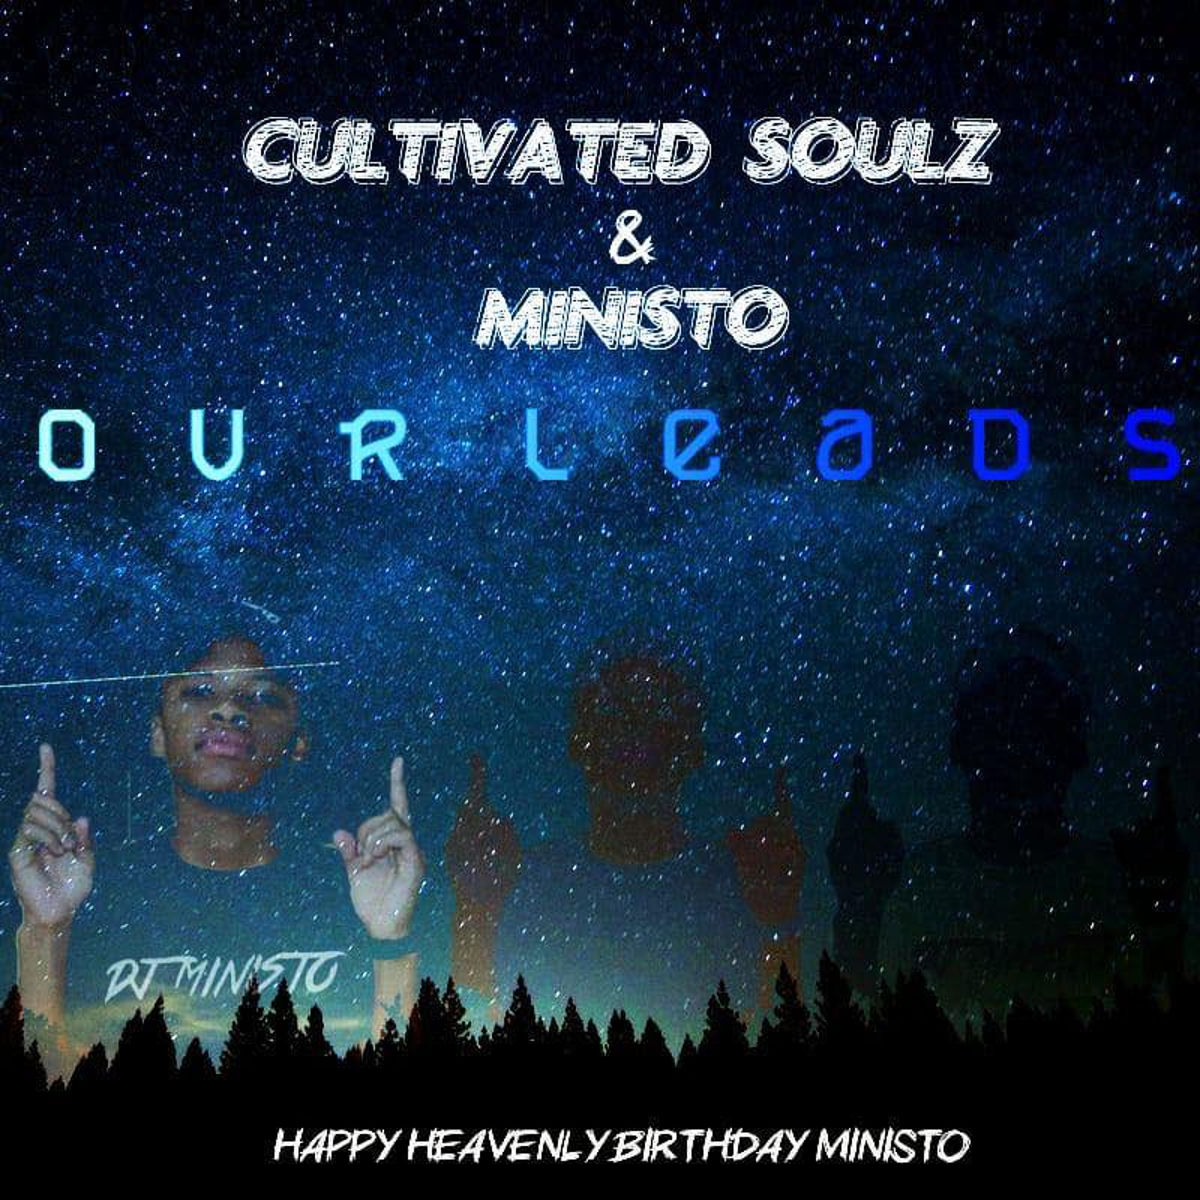 Cultivated Soulz & Dj Ministo - Our Leads